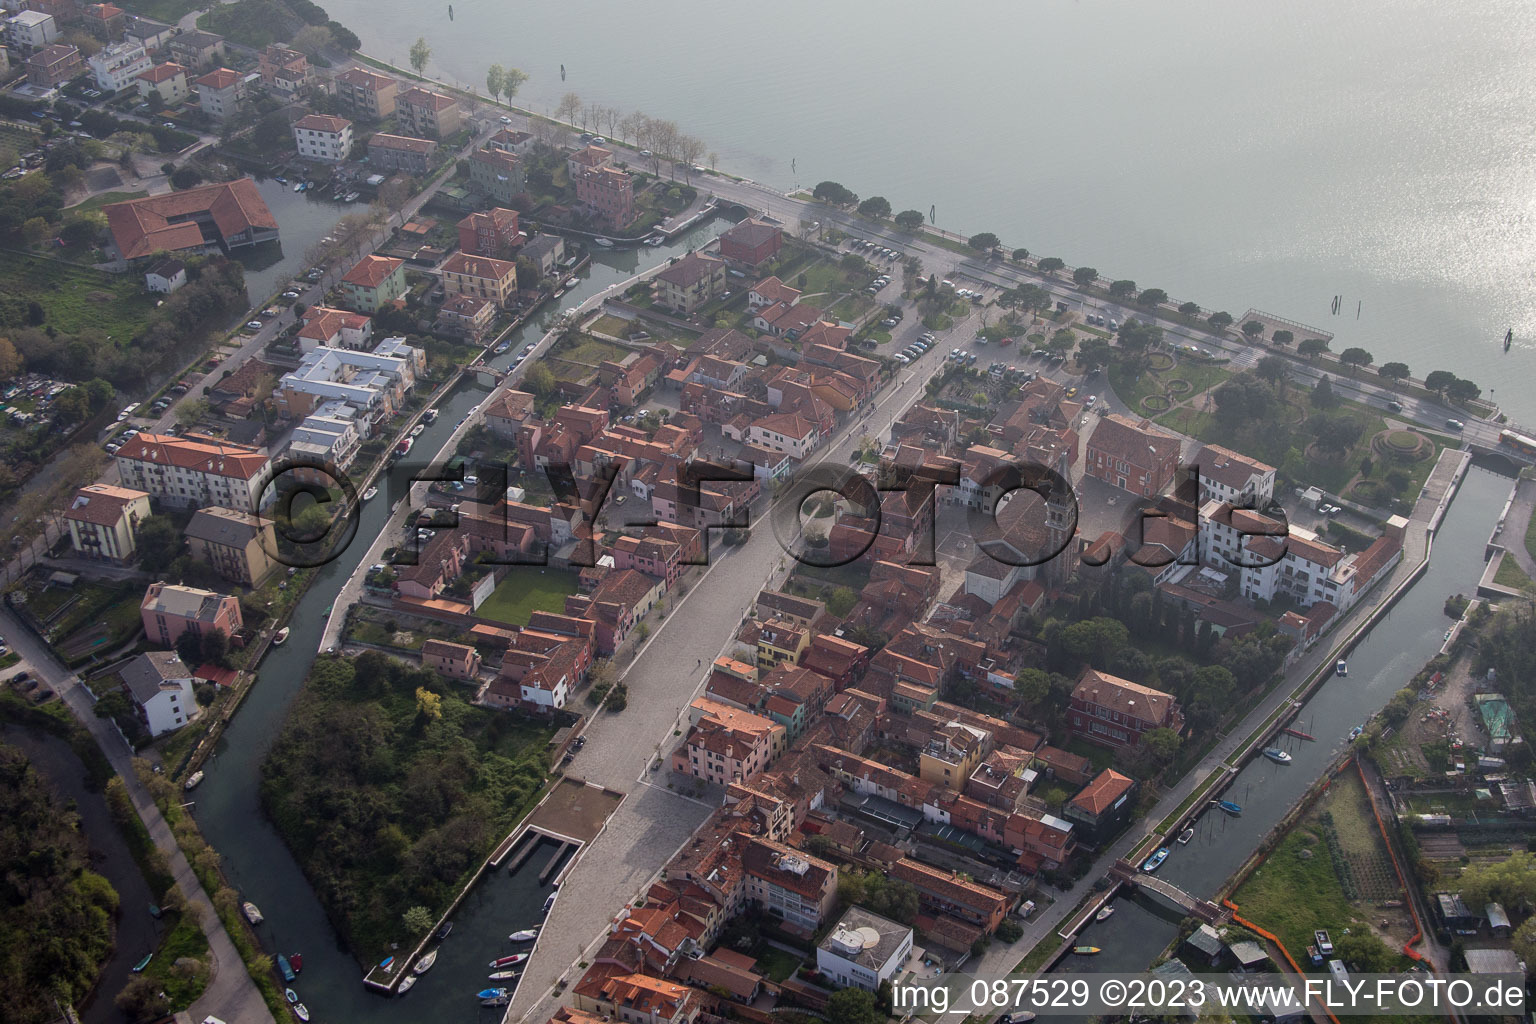 Drone image of Malamocco in the state Veneto, Italy